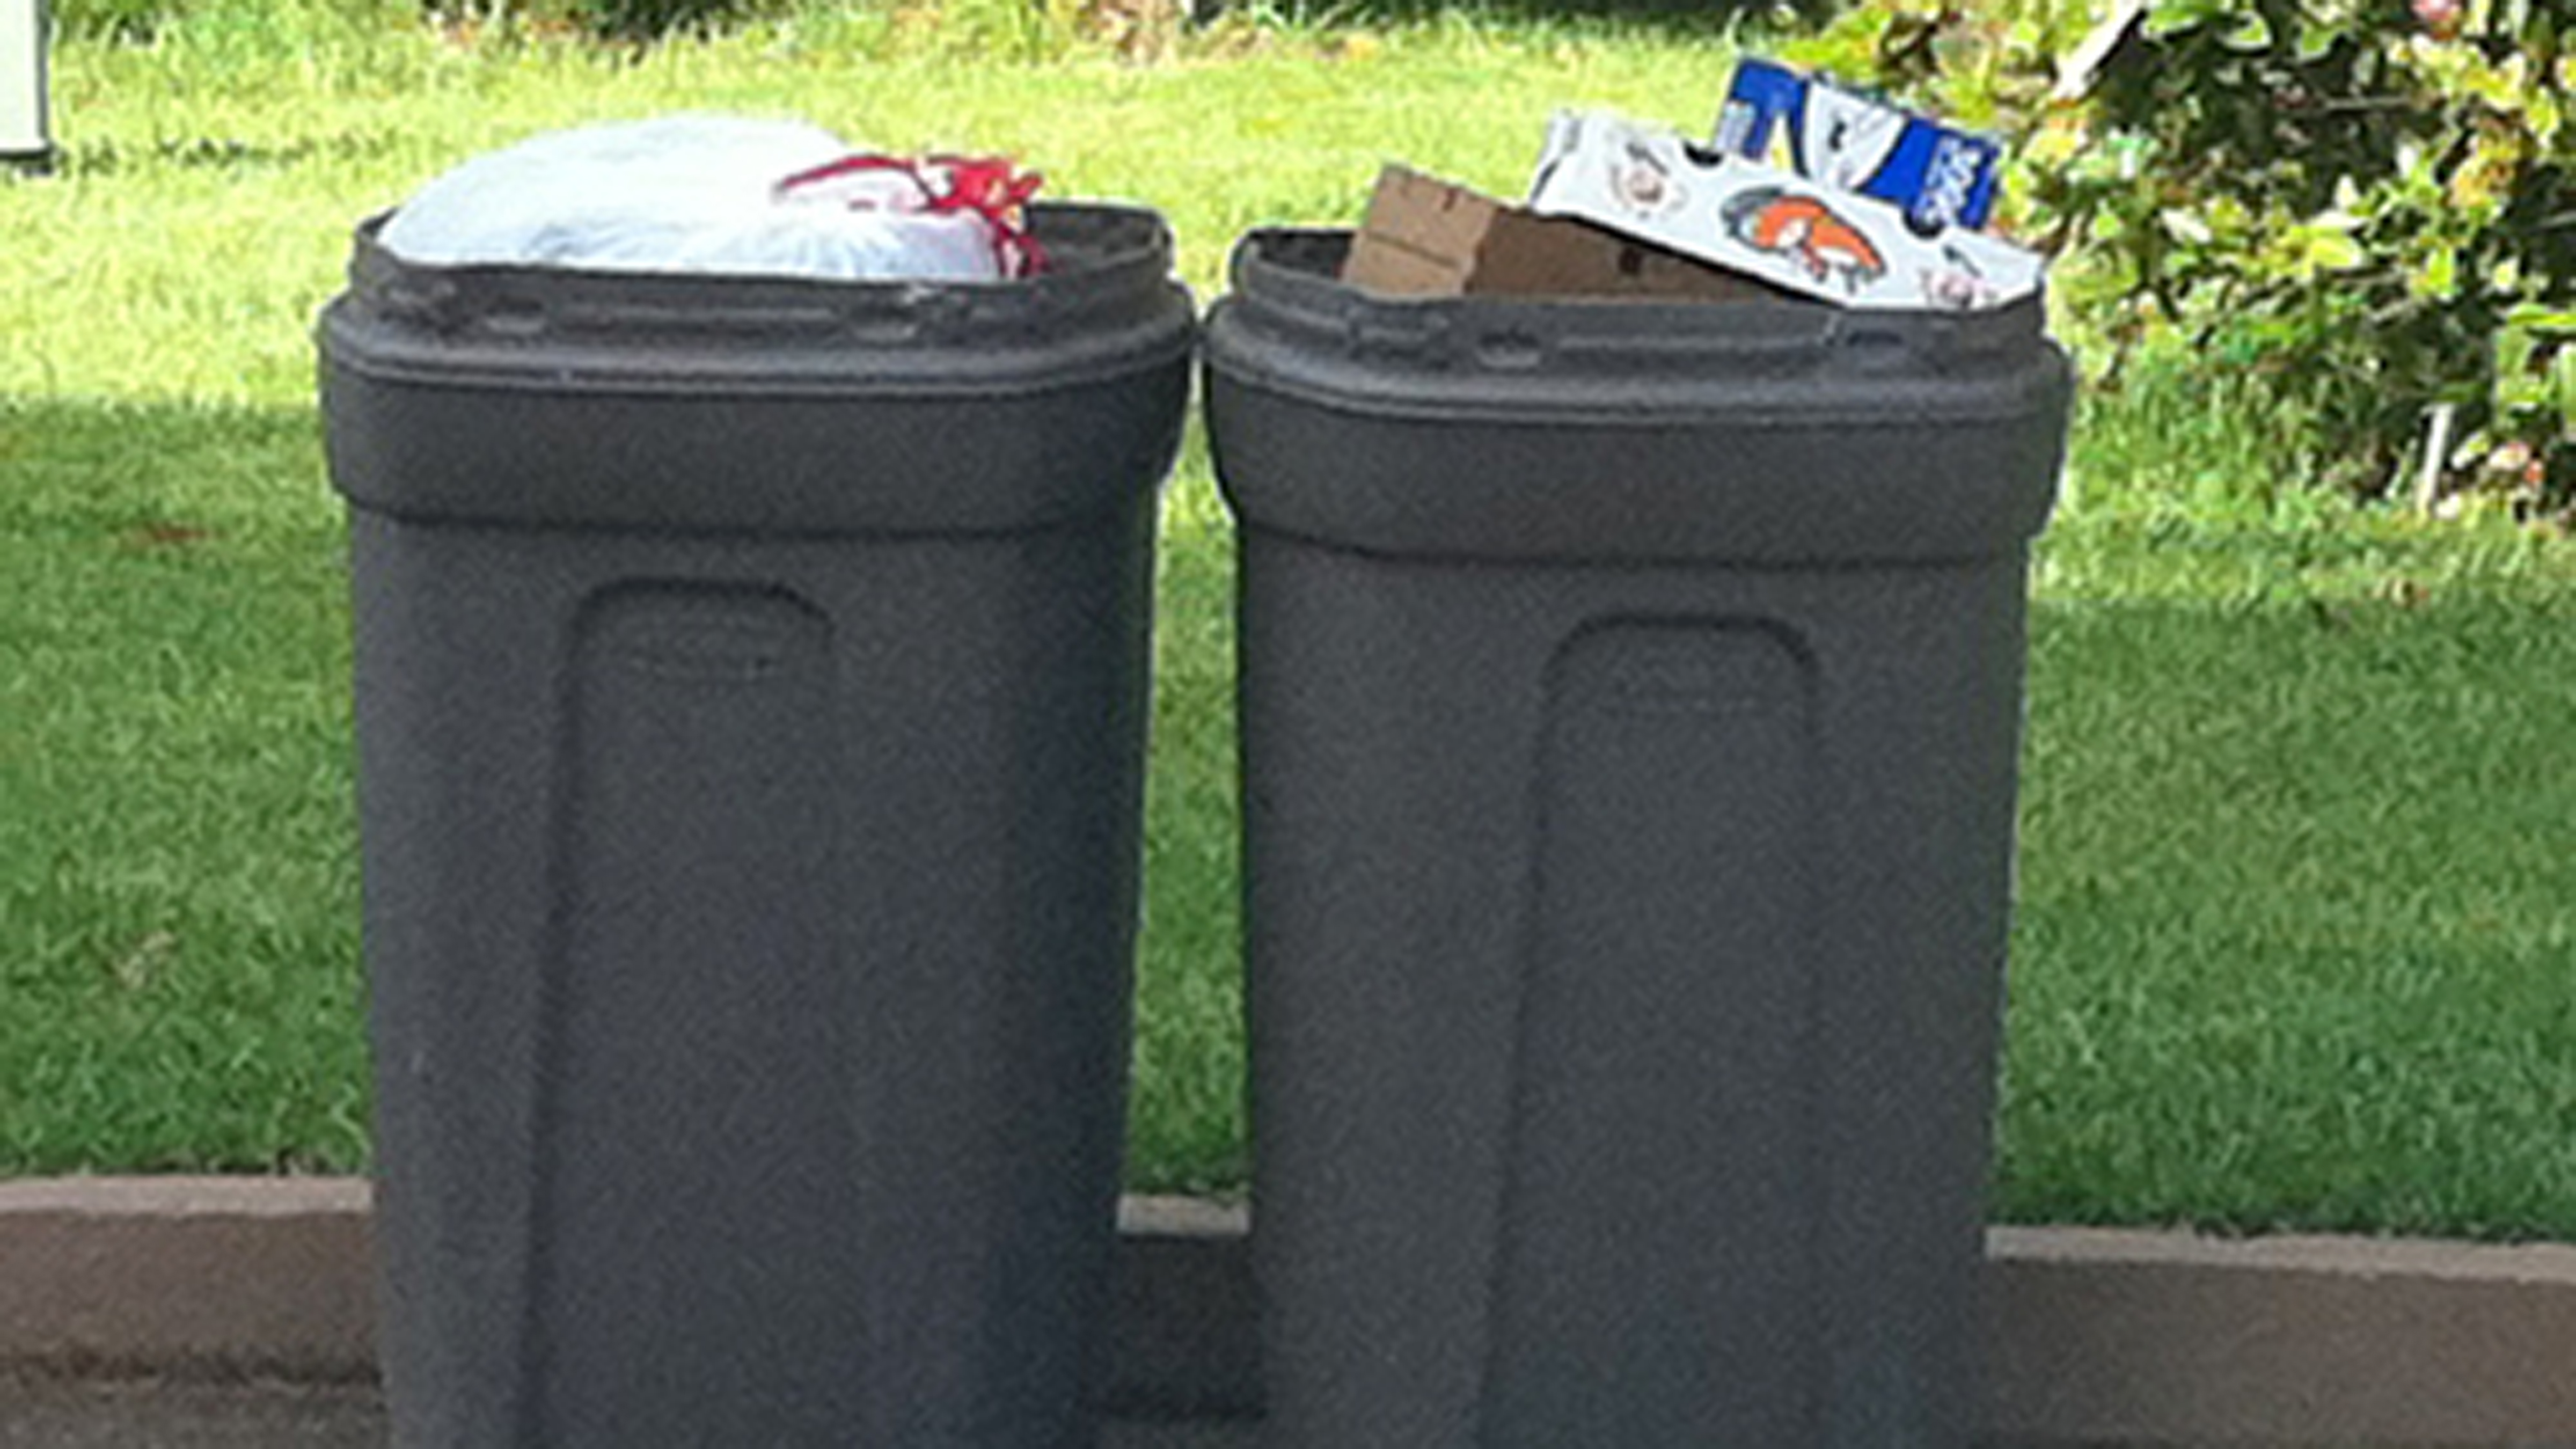 What to do with those old Garbage Cans • Tamarac Talk.